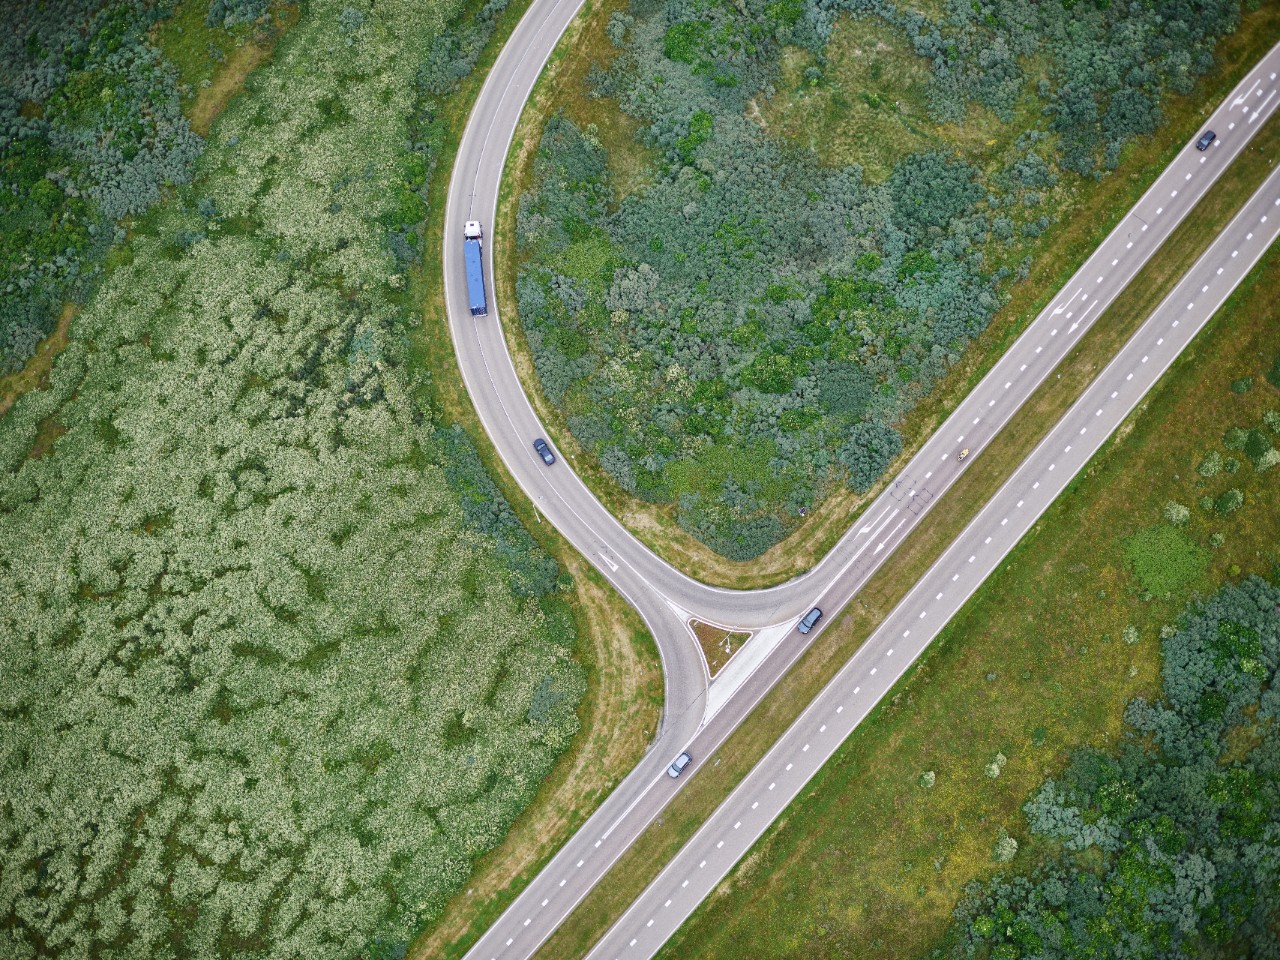 Scania truck on highway, aerial view
